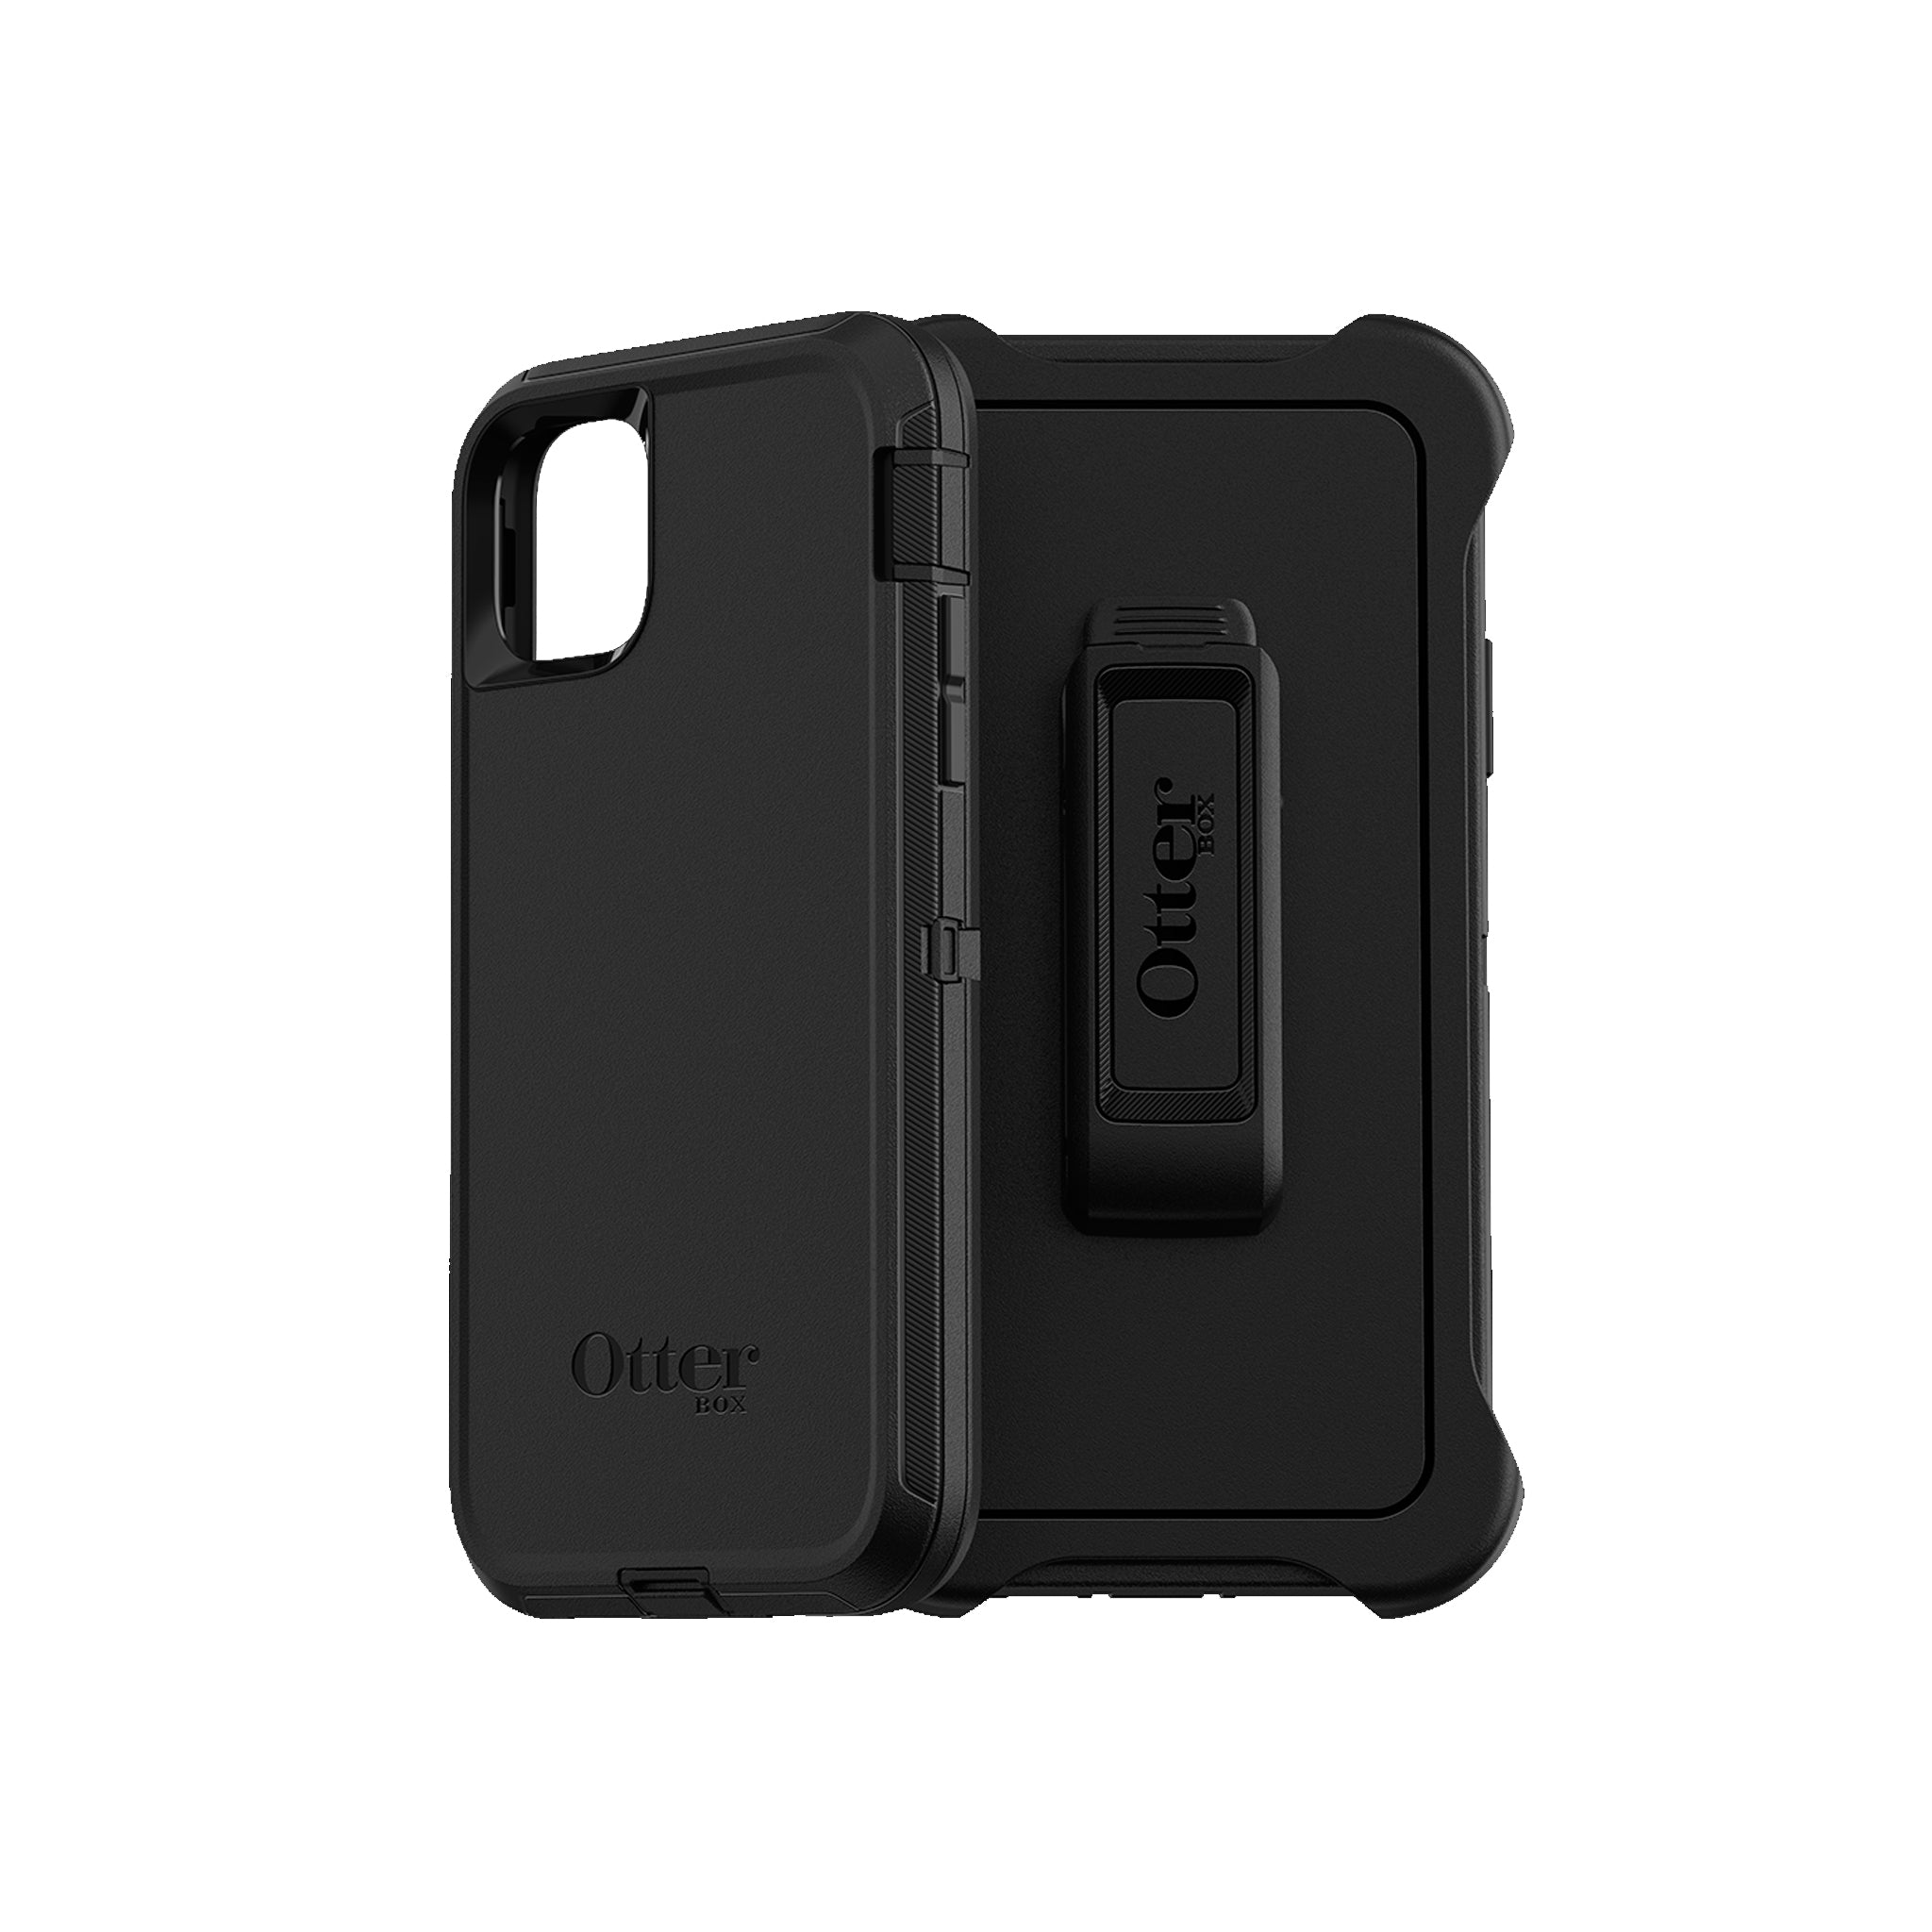 OtterBox - Defender Series Screenless Edition Case for iPhone 11 Pro Max - Black